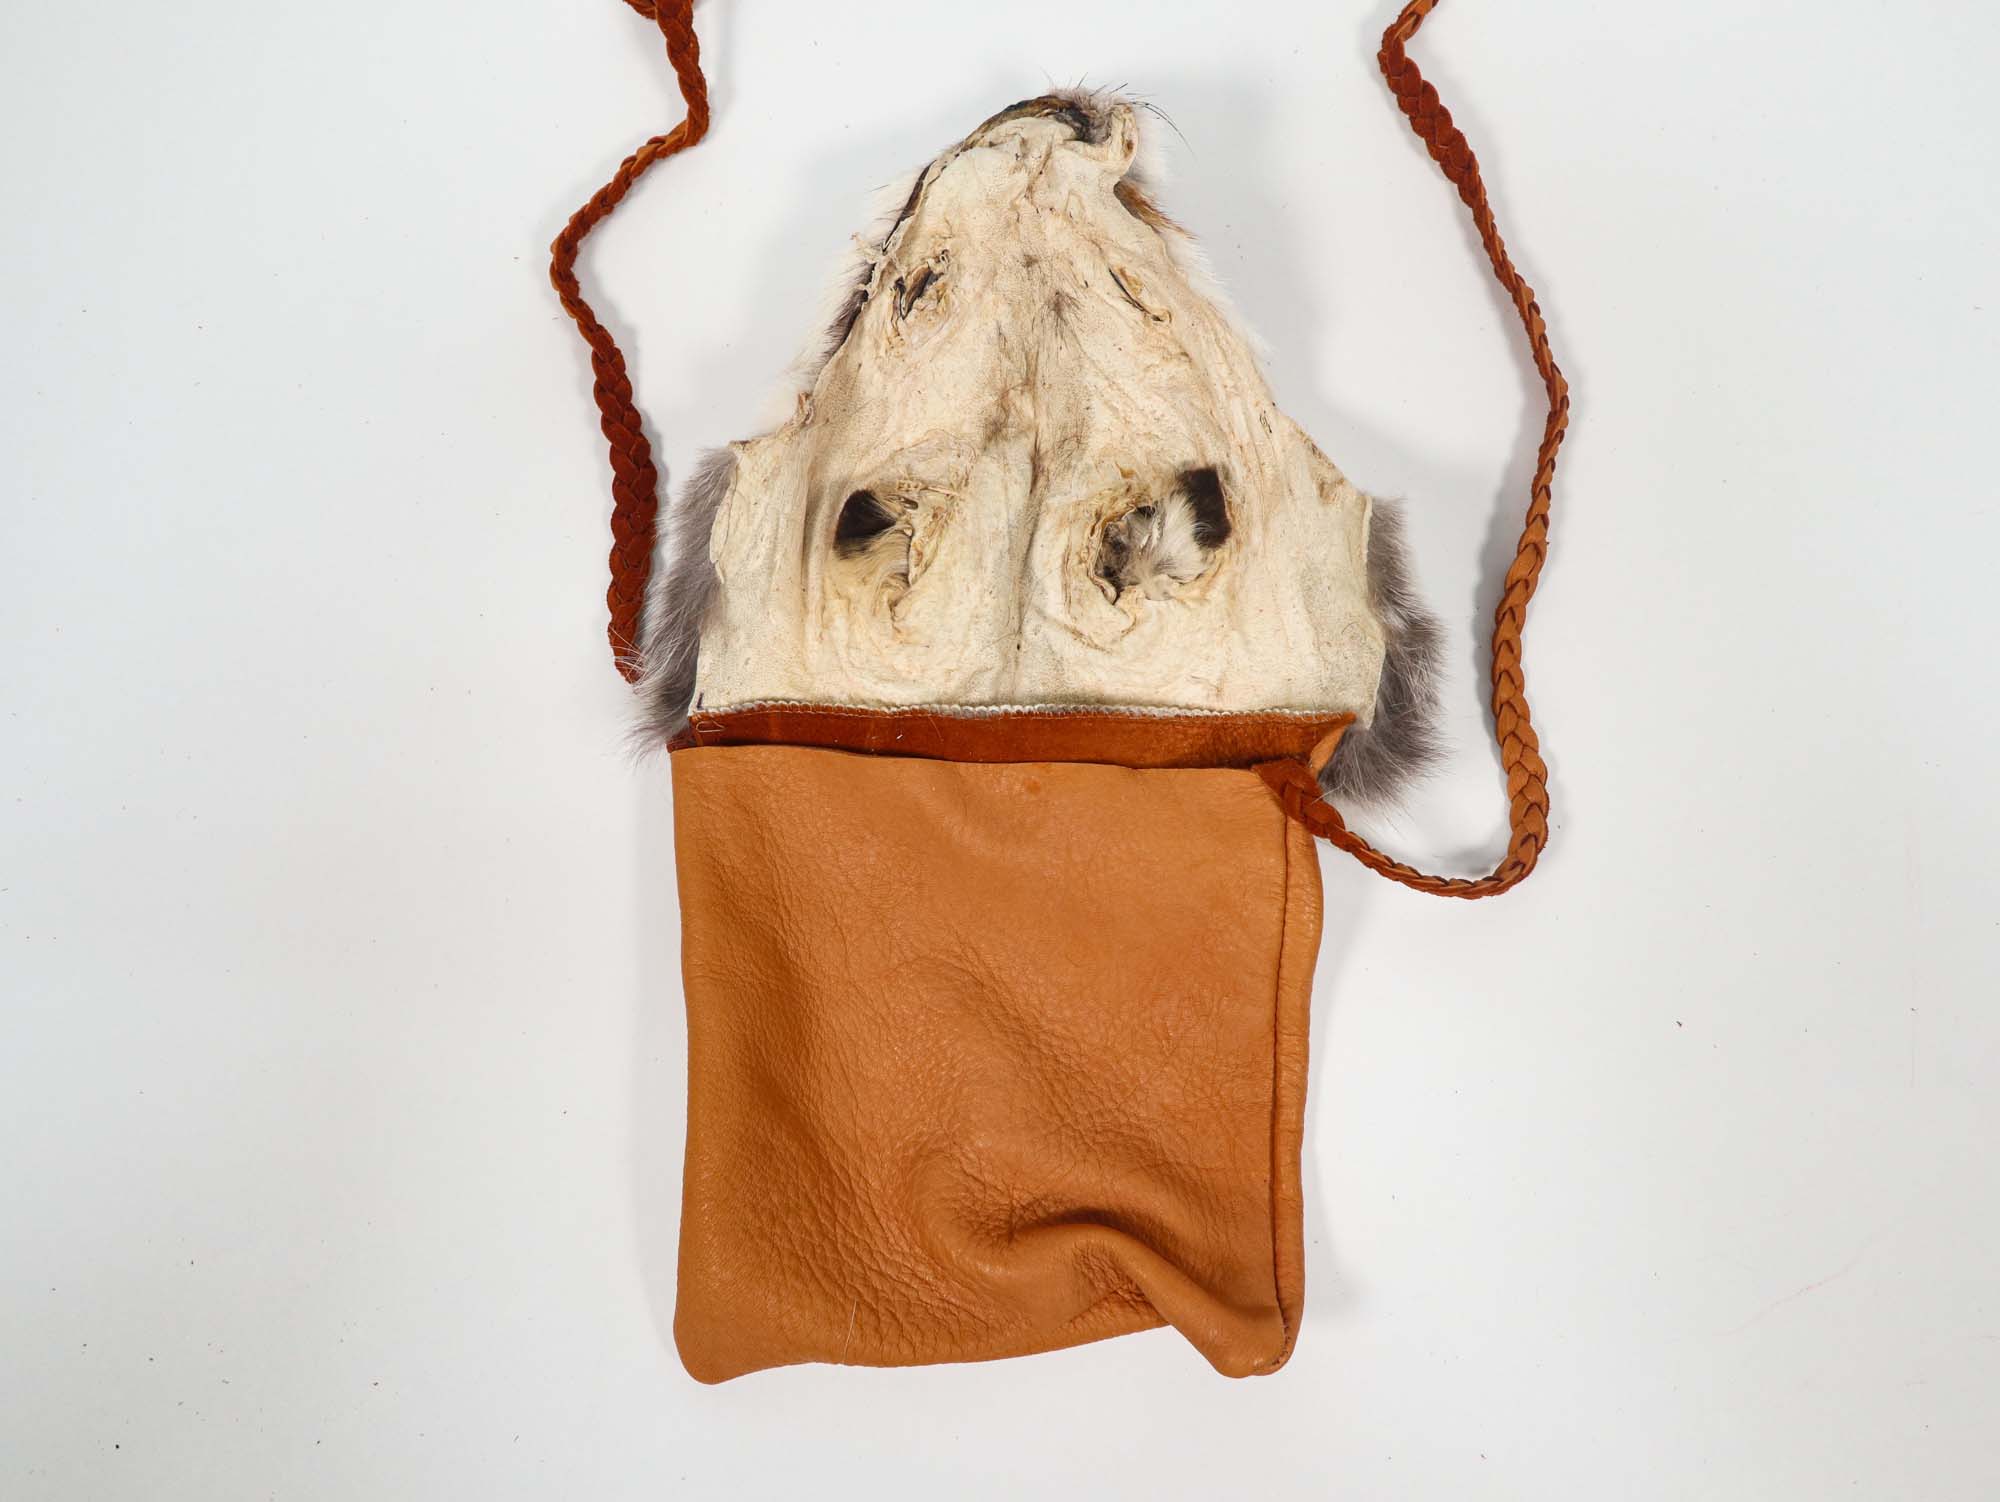 Red Fox Face Bag: Gallery Item - 422-66-G4798 (A3)